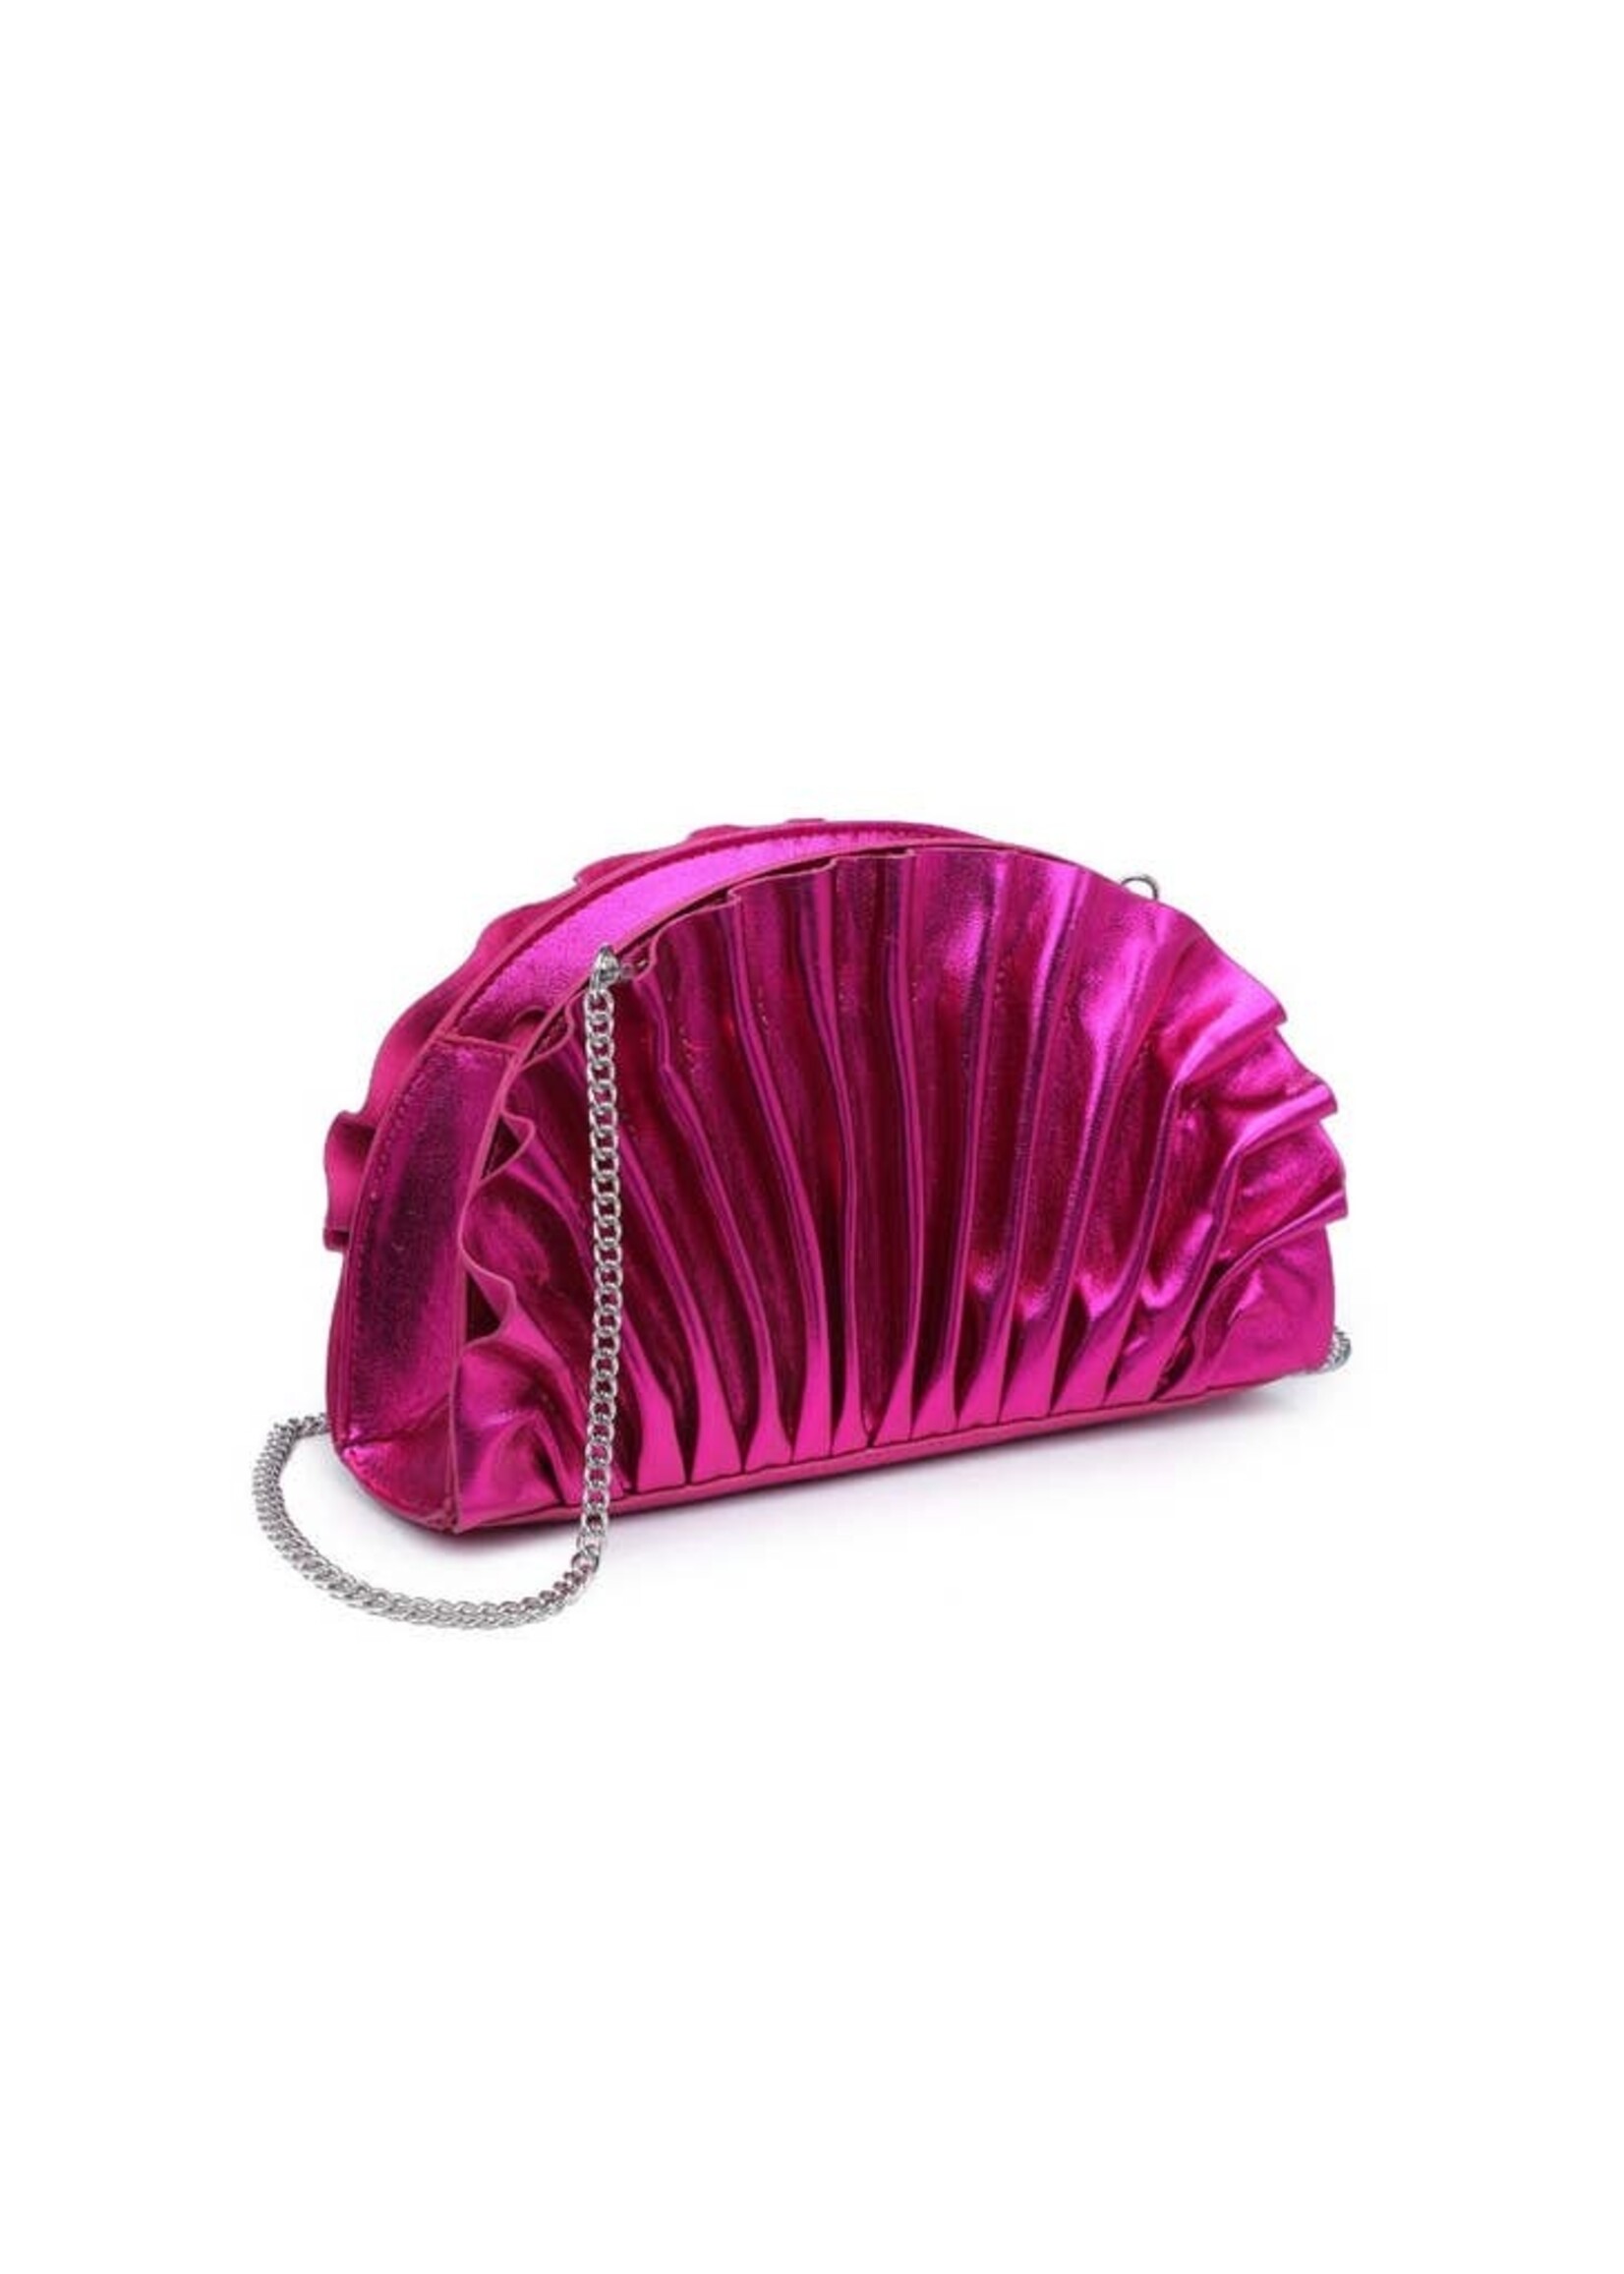 Urban Expressions Ariel Pleated Hot Pink Evening Clutch